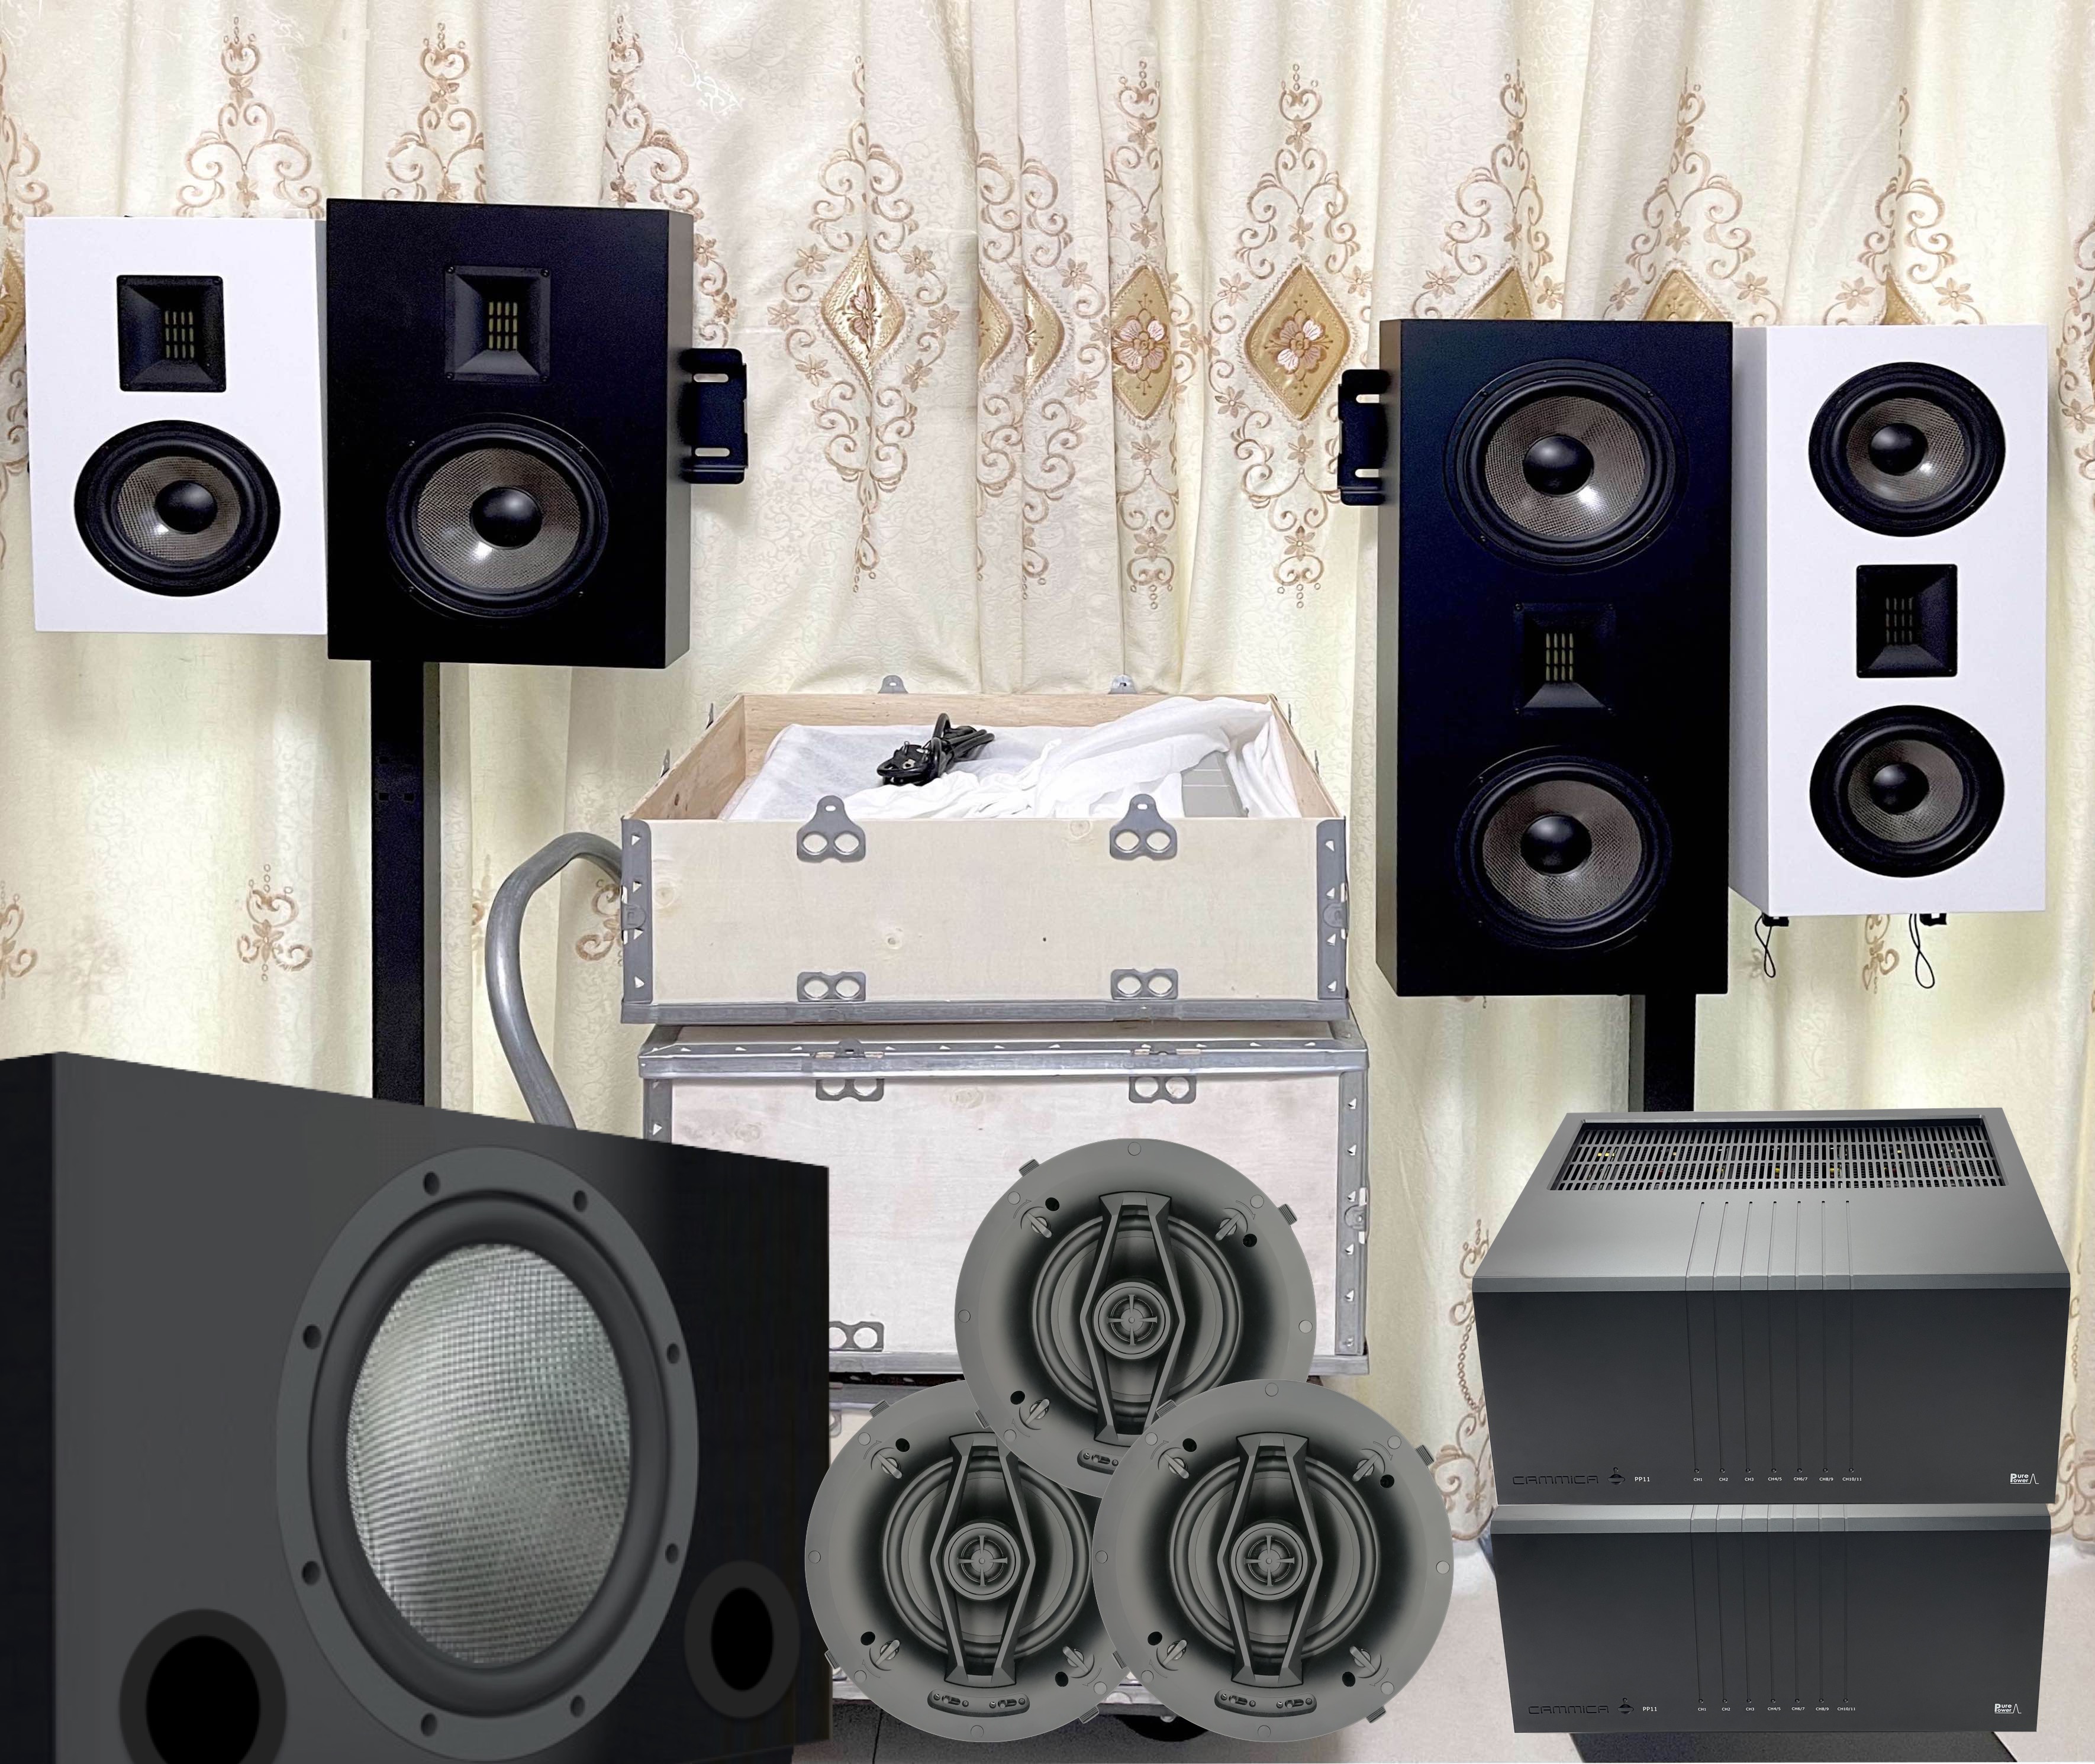 What is a home theater surround sound system?